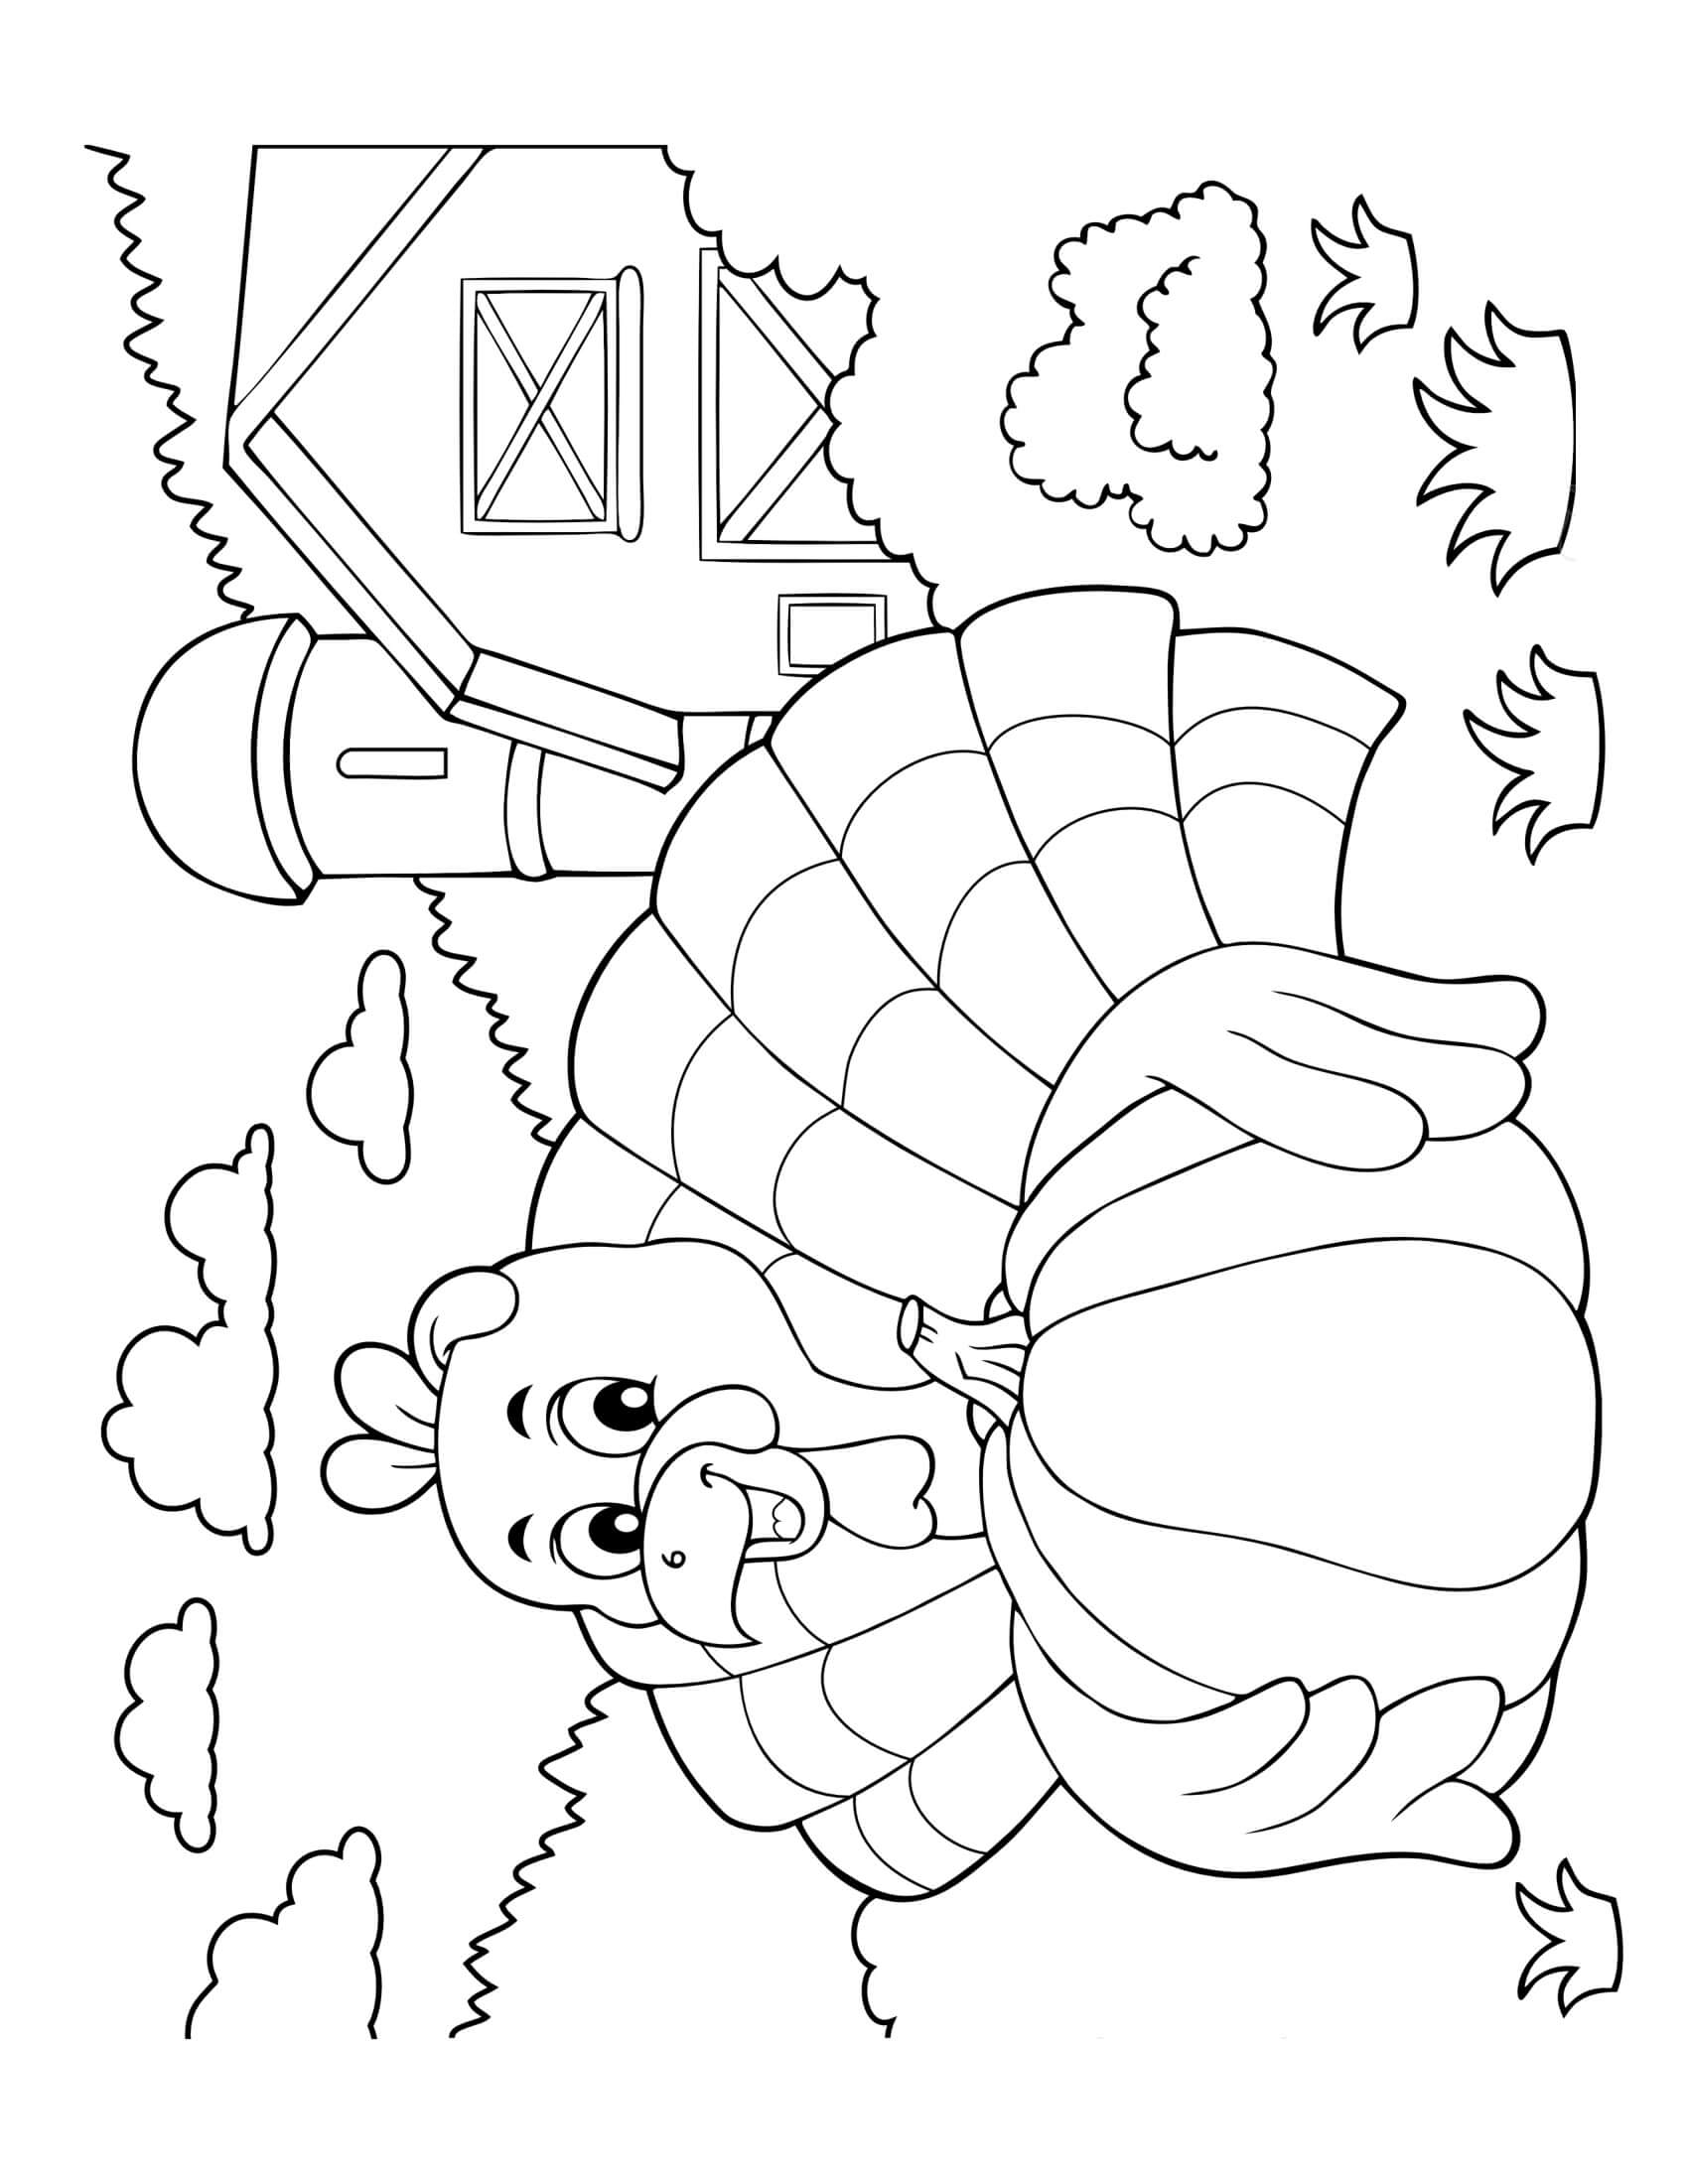 Thanksgiving Turkey Near Barn Coloring Page